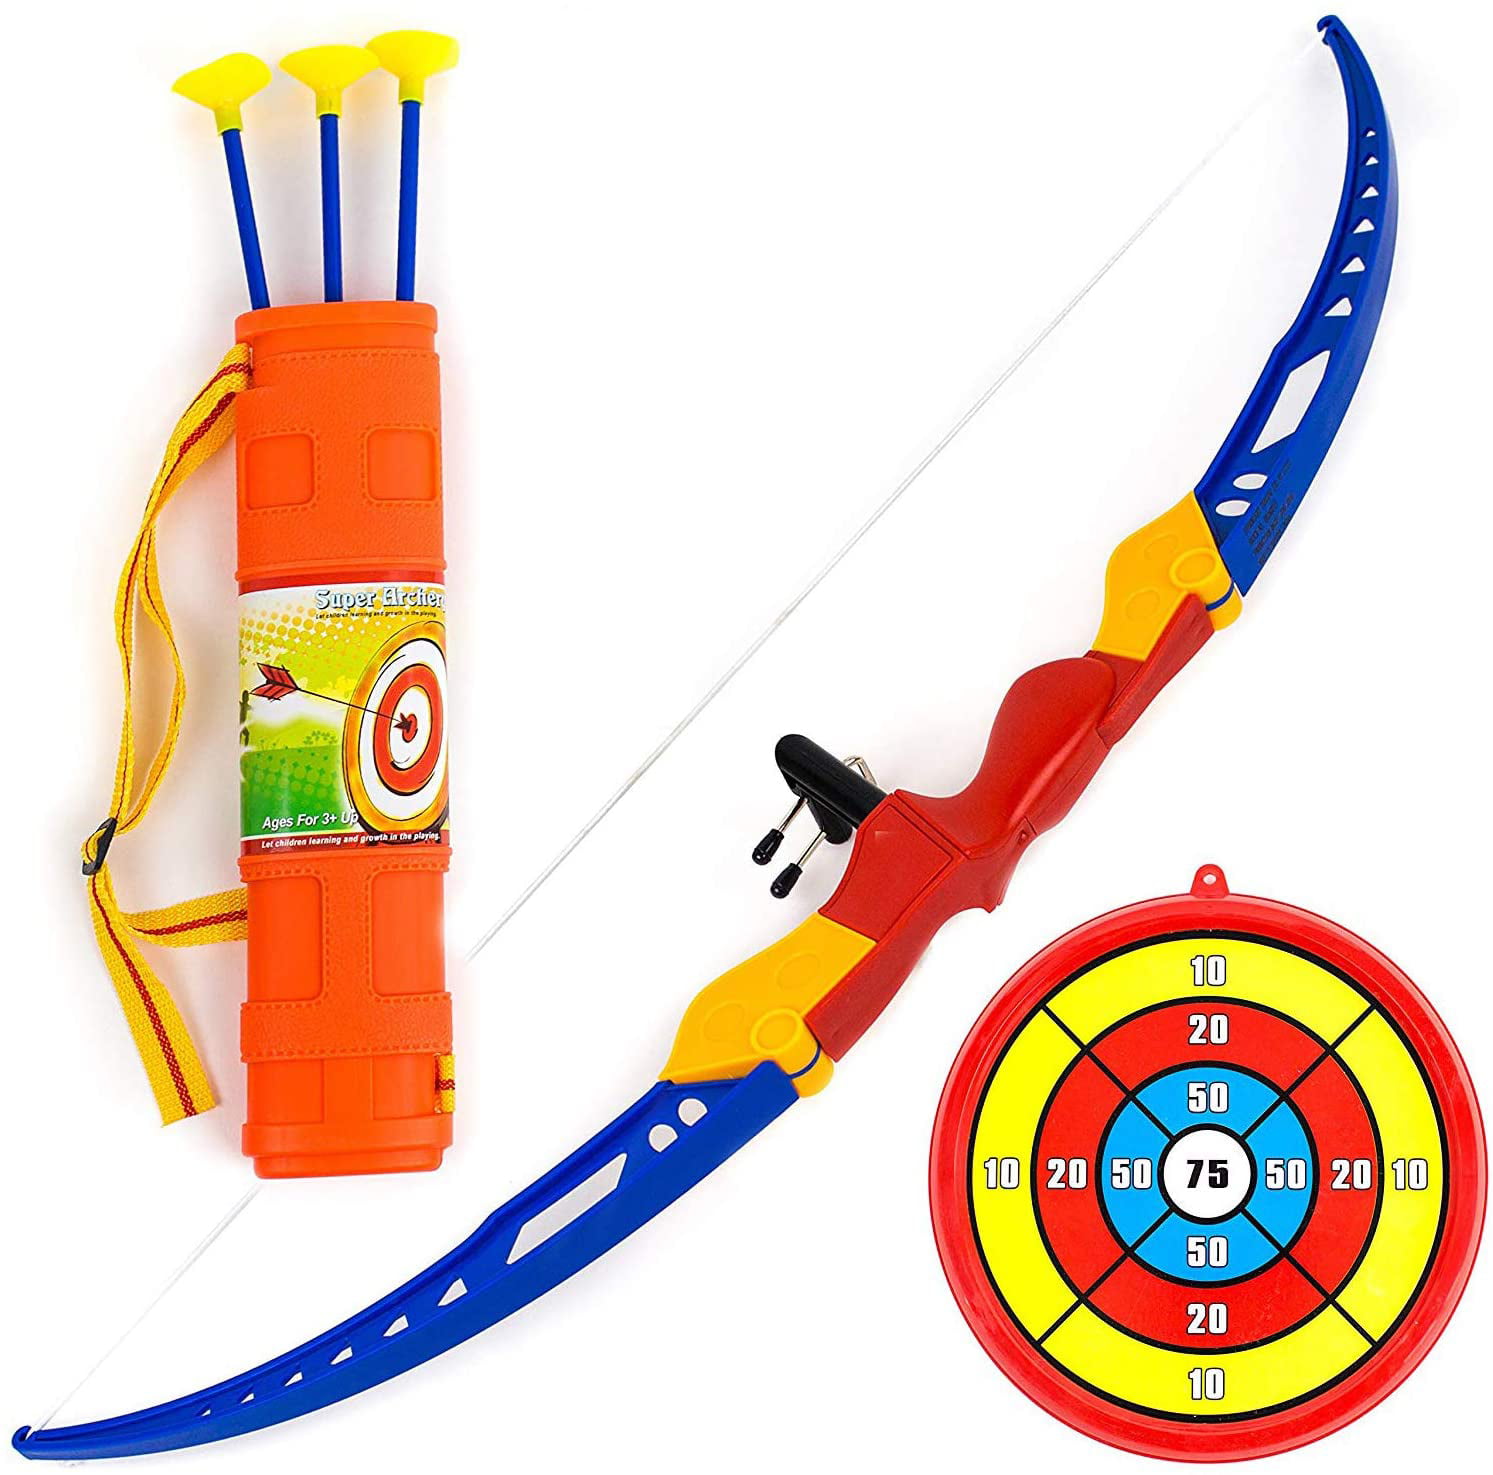 10 Pieces Kids Archery Suction Hunting Arrow Rubber Practice Sucker Yellow 